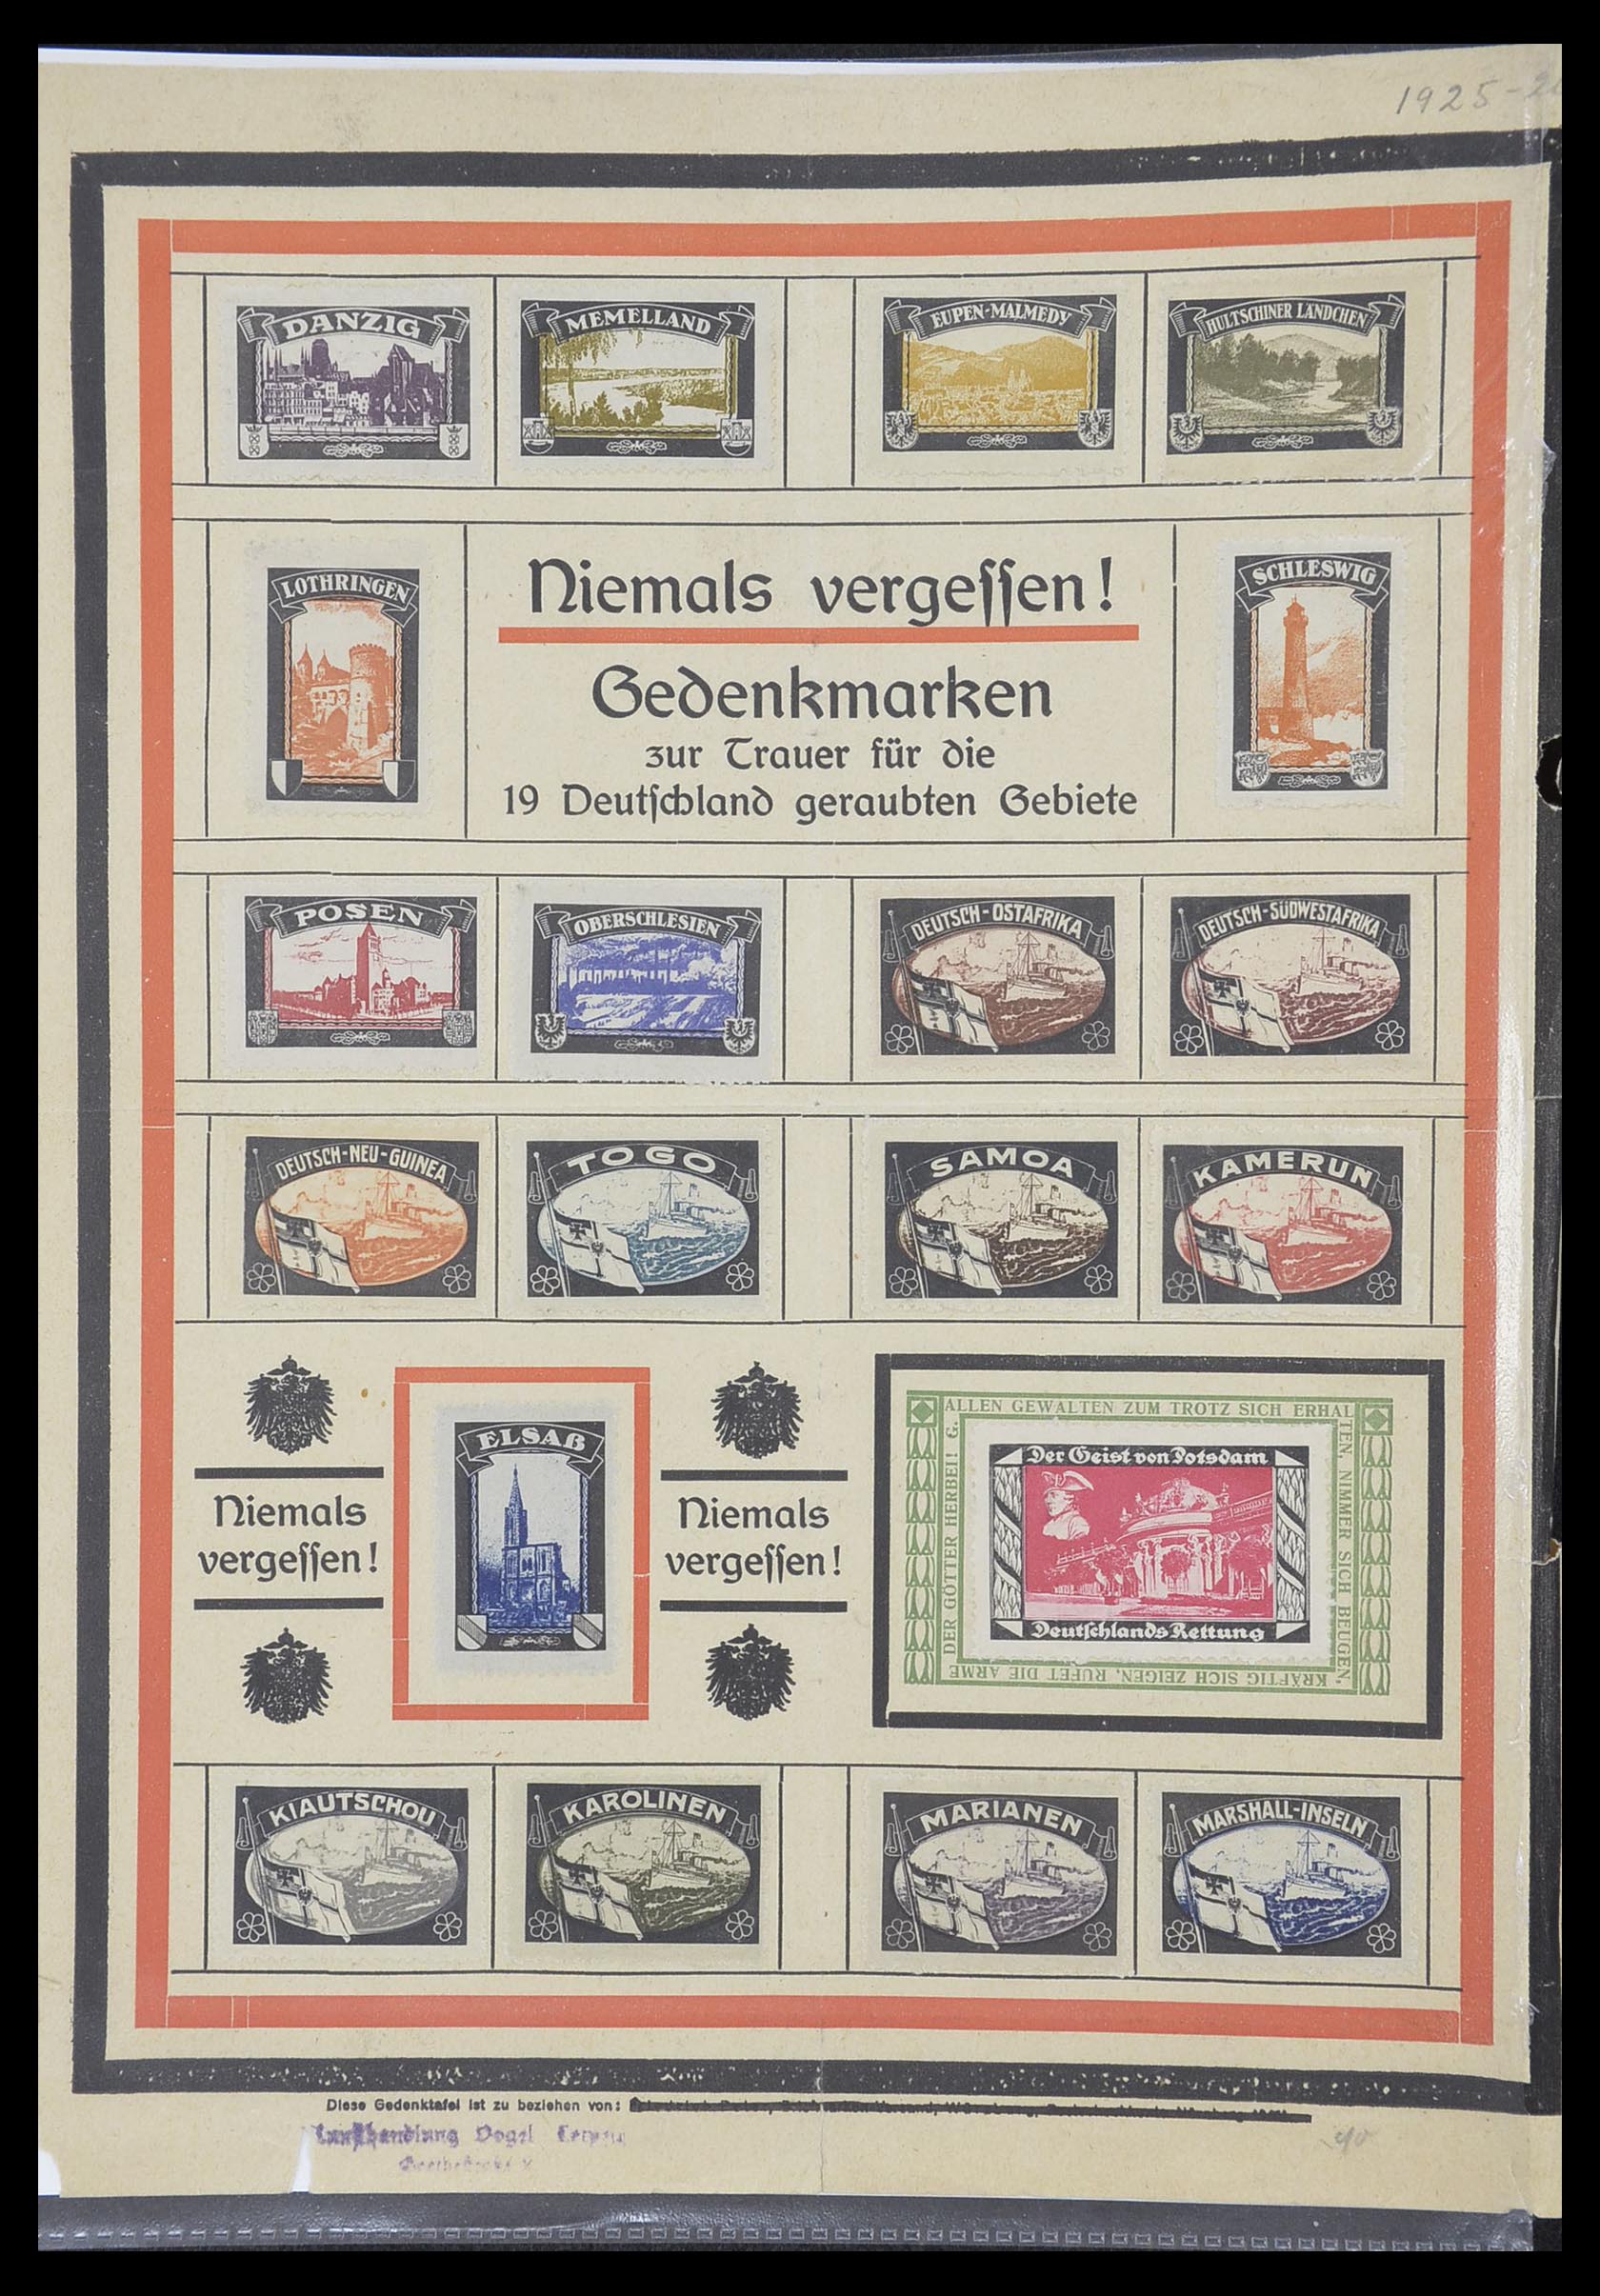 33770 0088 - Stamp collection 33770 Germany covers 1933-1949.